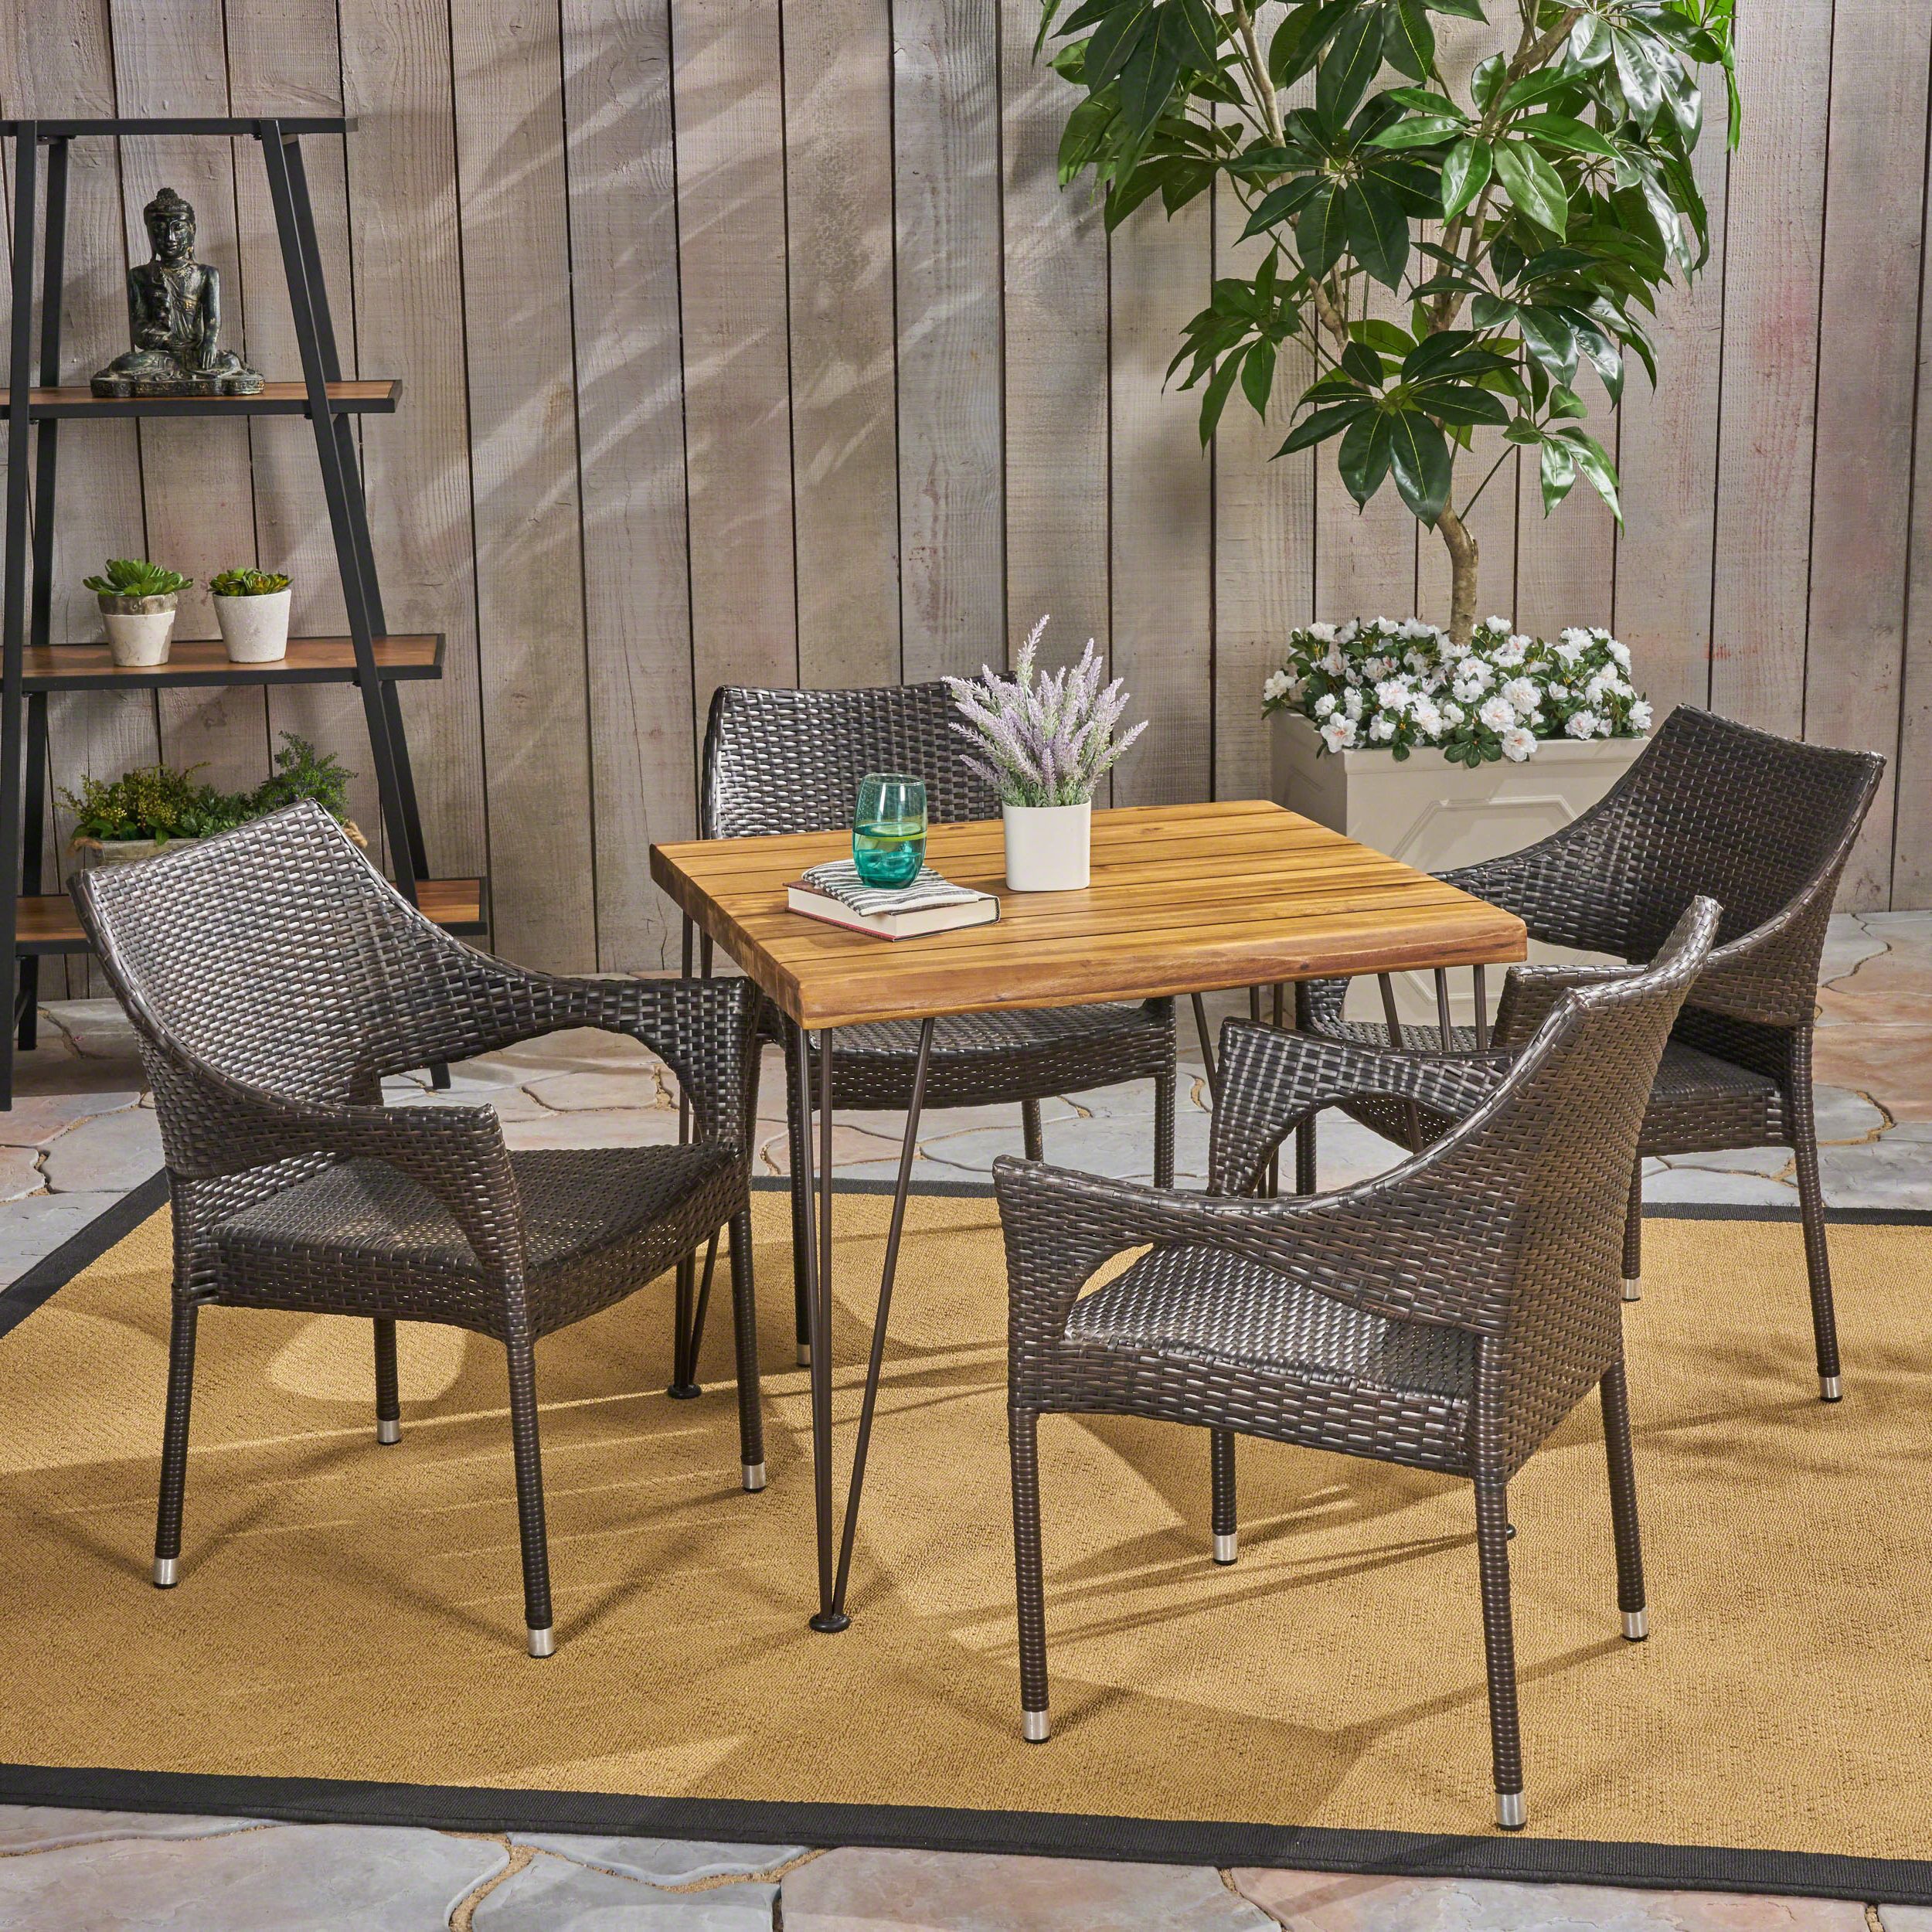 Teak Wicker Outdoor Dining Sets With Best And Newest Arya Outdoor 5 Piece Industrial Wood And Wicker Square Dining Set (View 13 of 15)